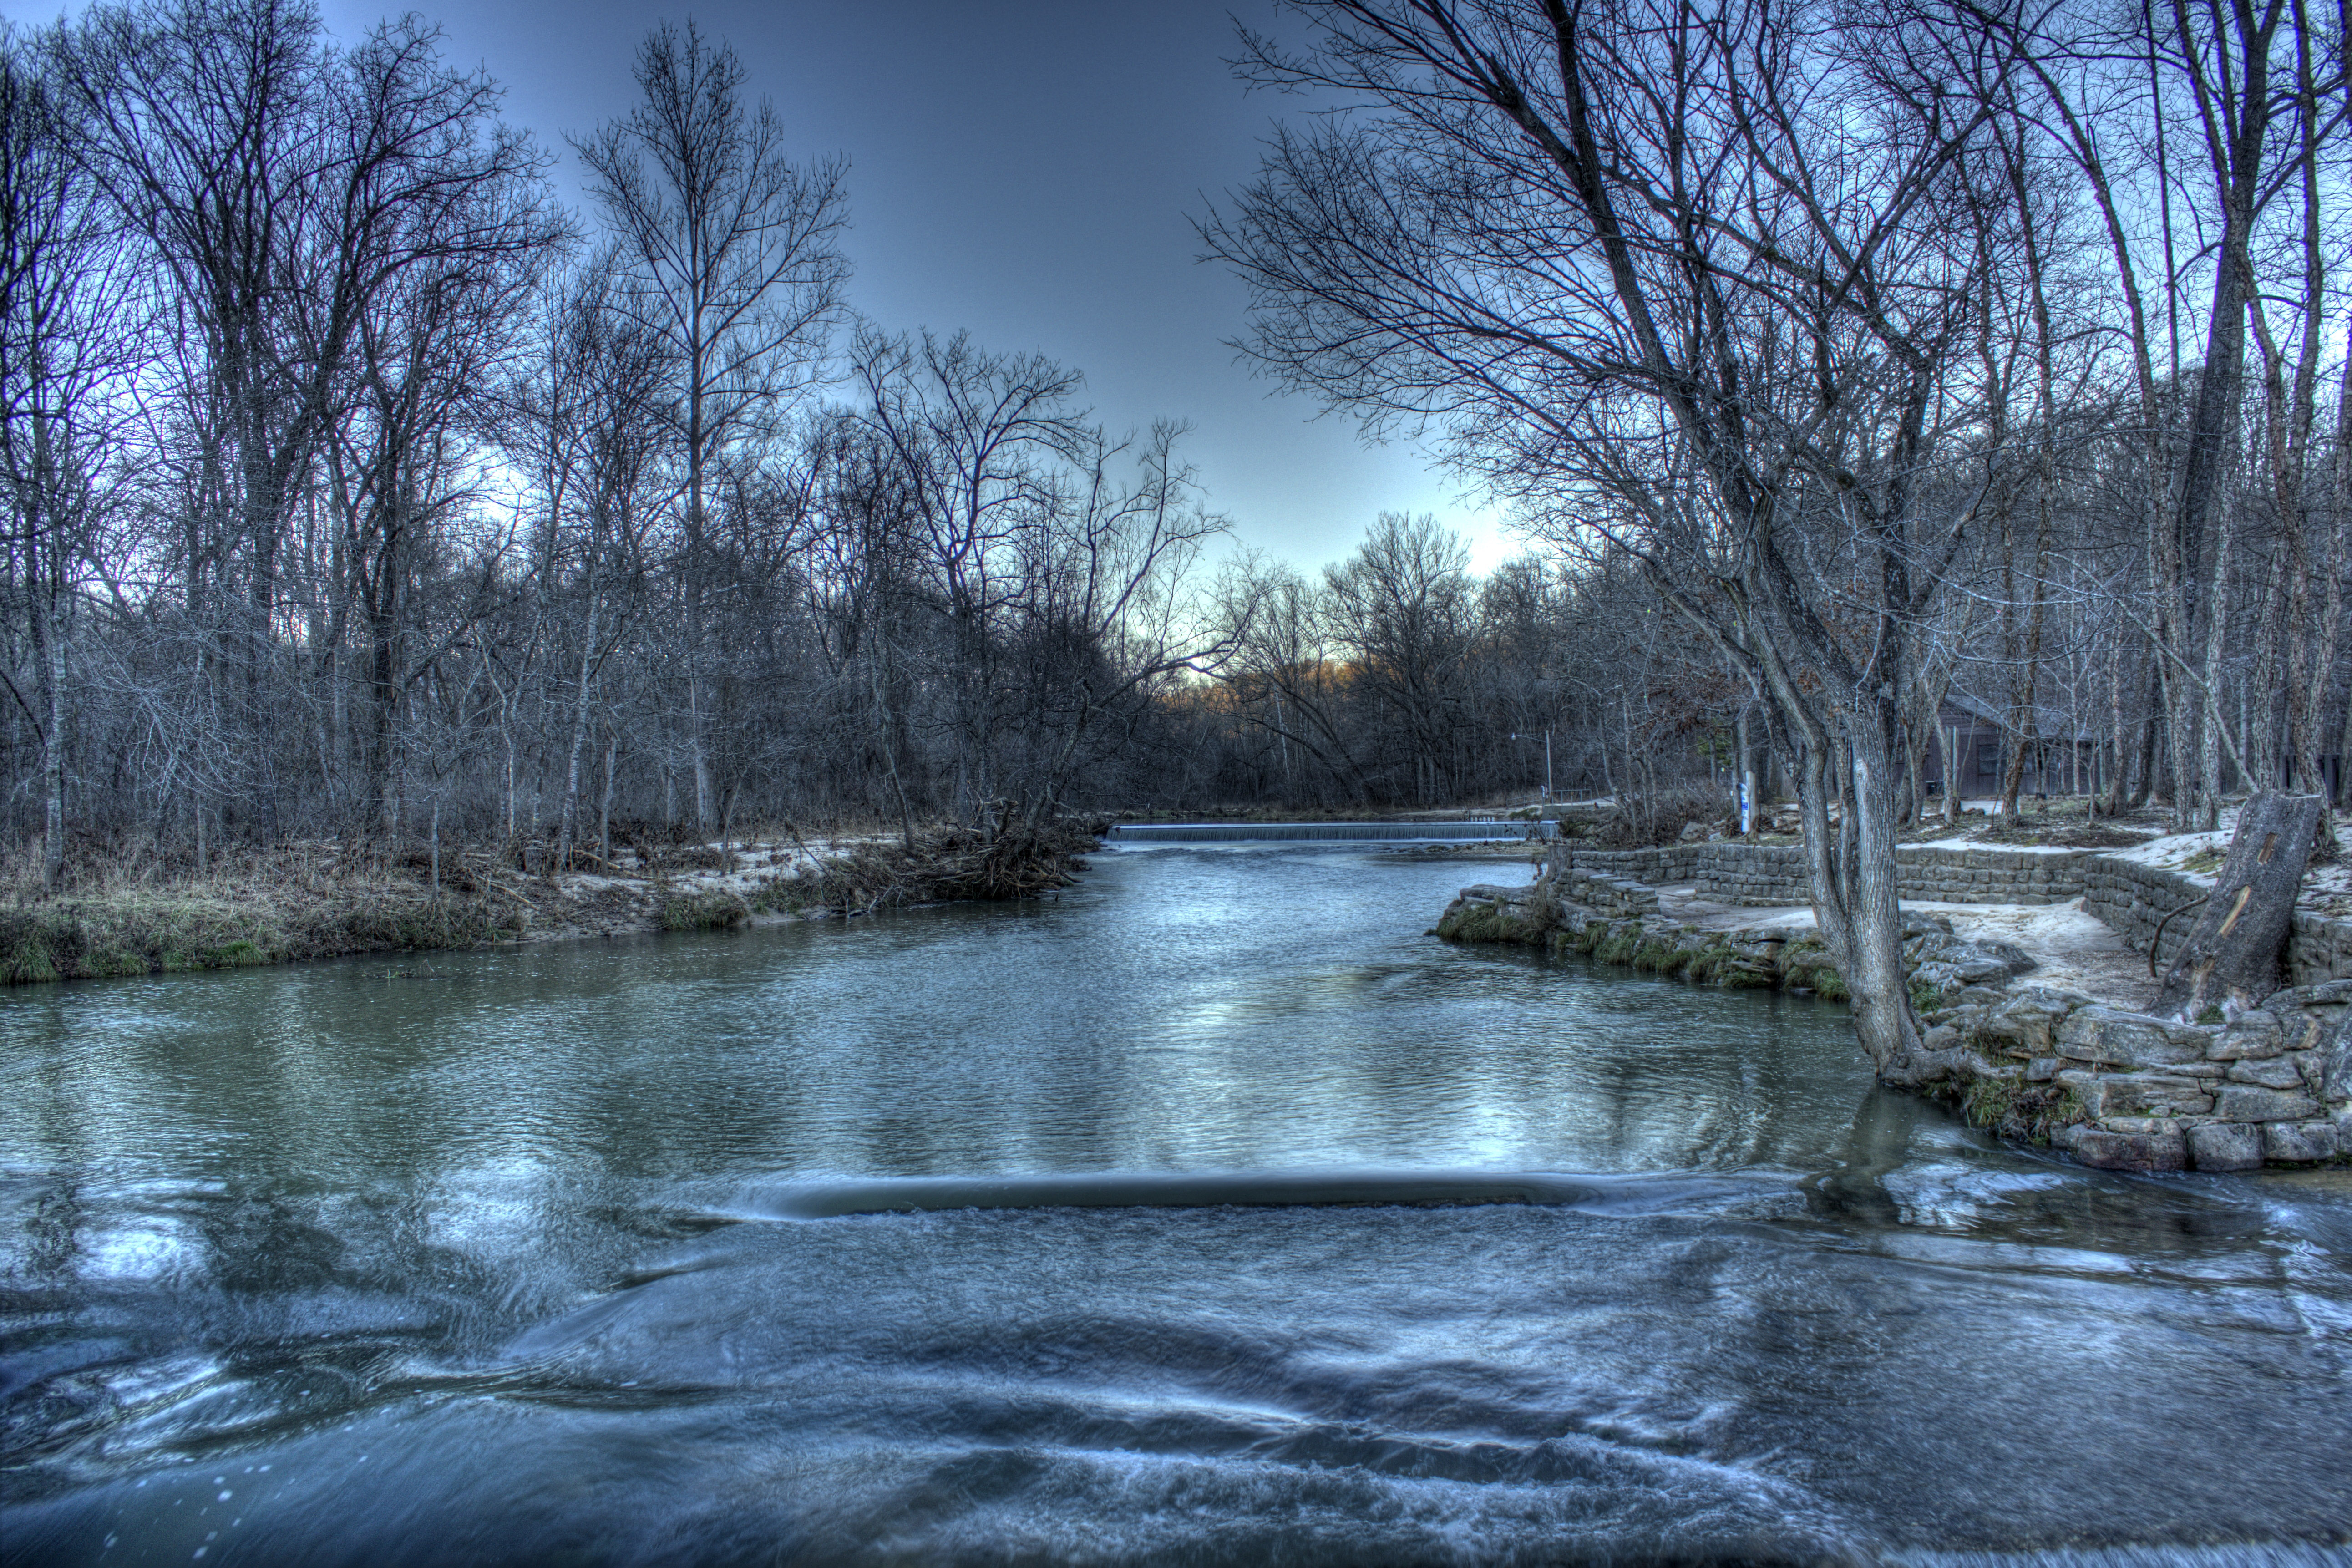 The flowing Current River at Montauk State Park, Missouri image - Free